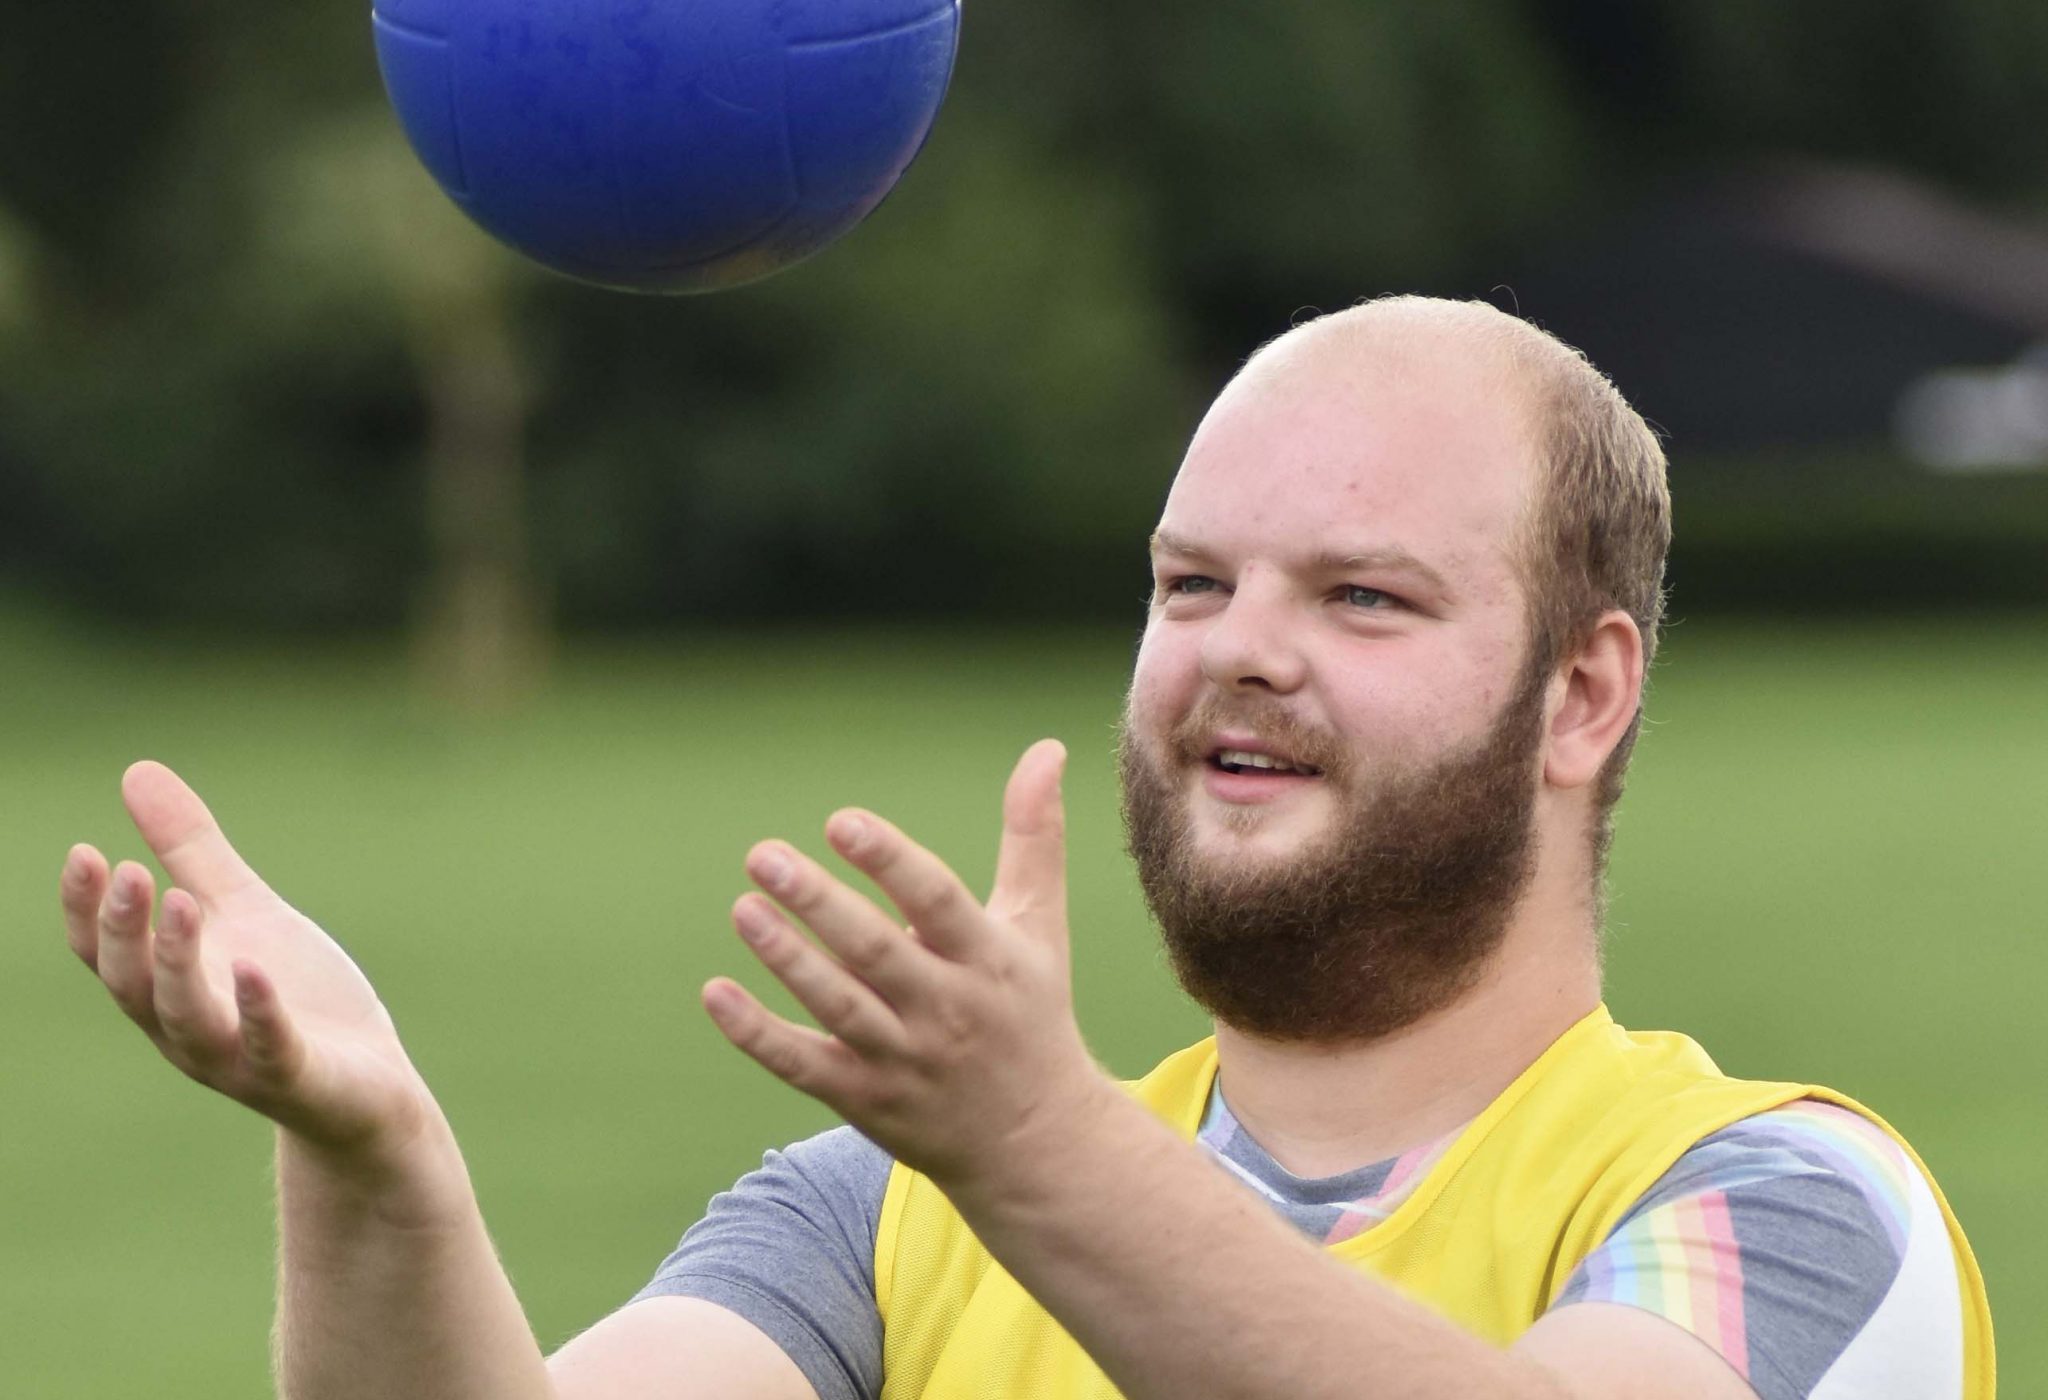 Person with learning difficulties enjoying sport activities